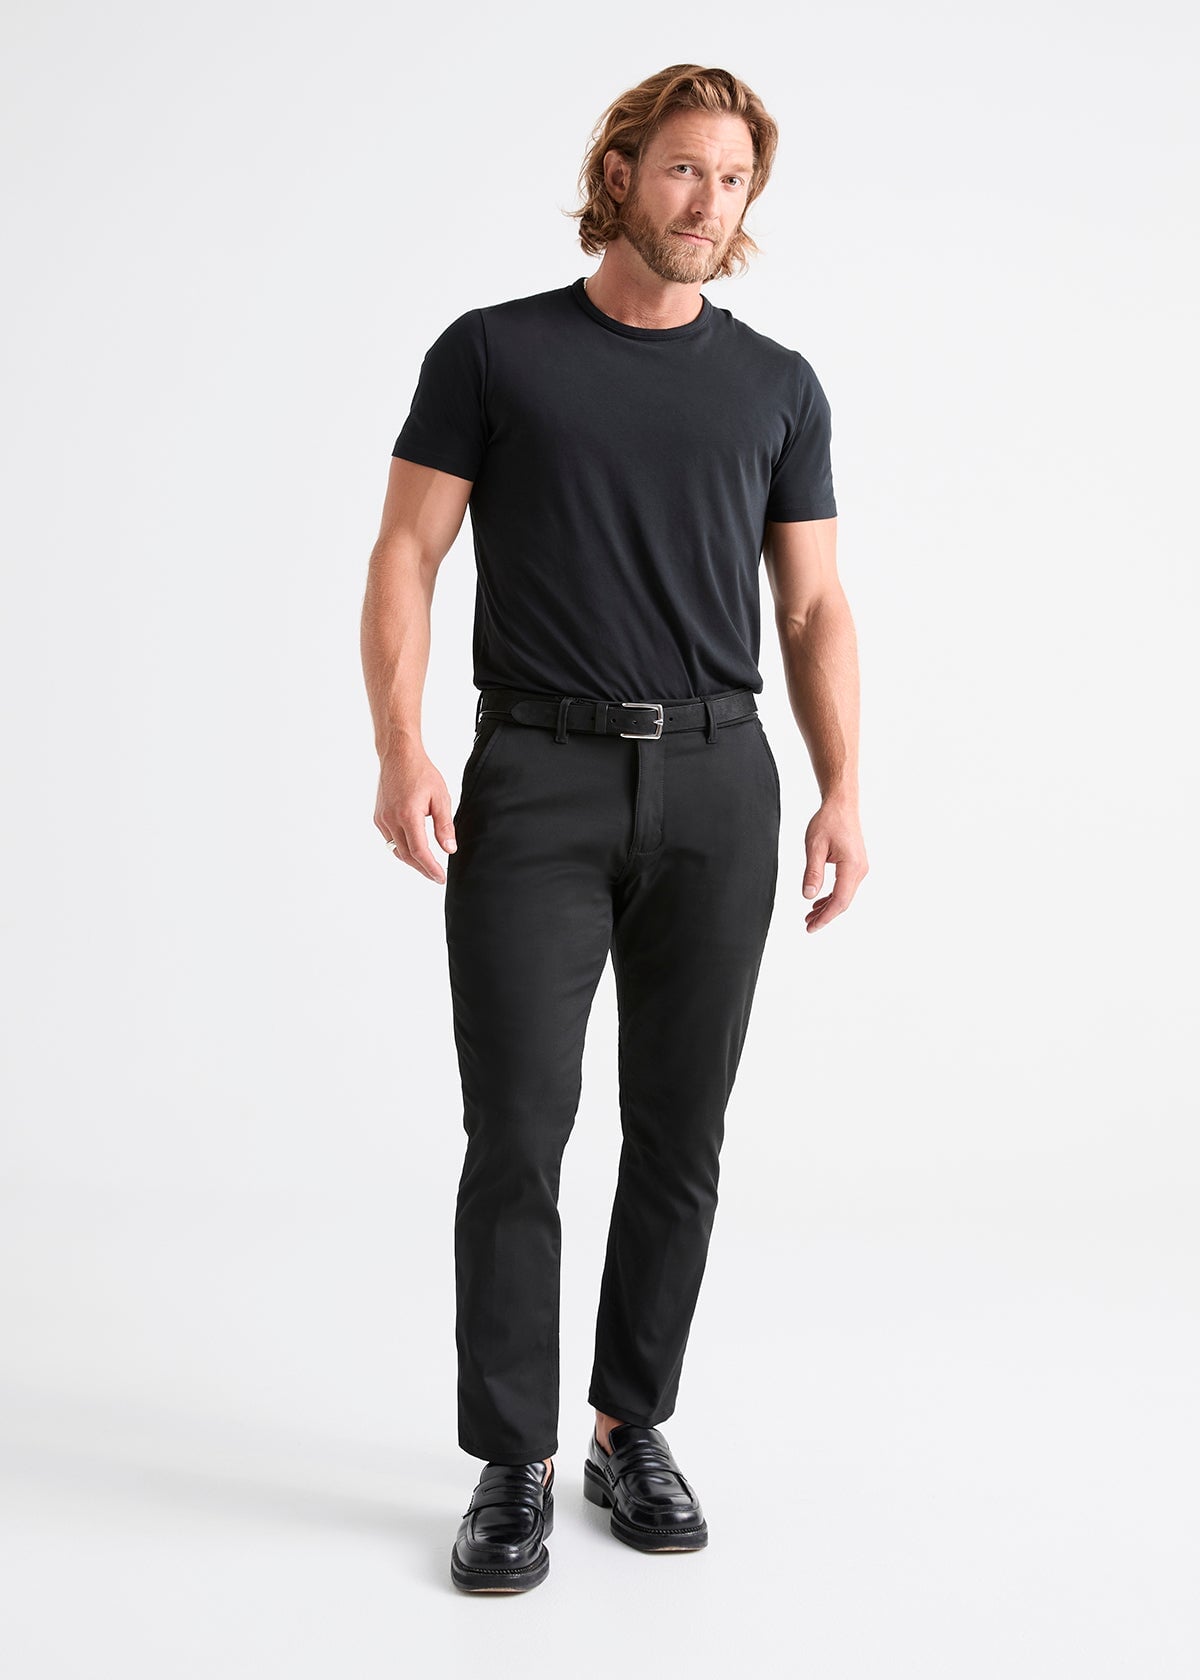 Buy Zee Gold Men's Black Regular Straight Relaxed Fit Formal Trousers (Size  - 28) at Amazon.in